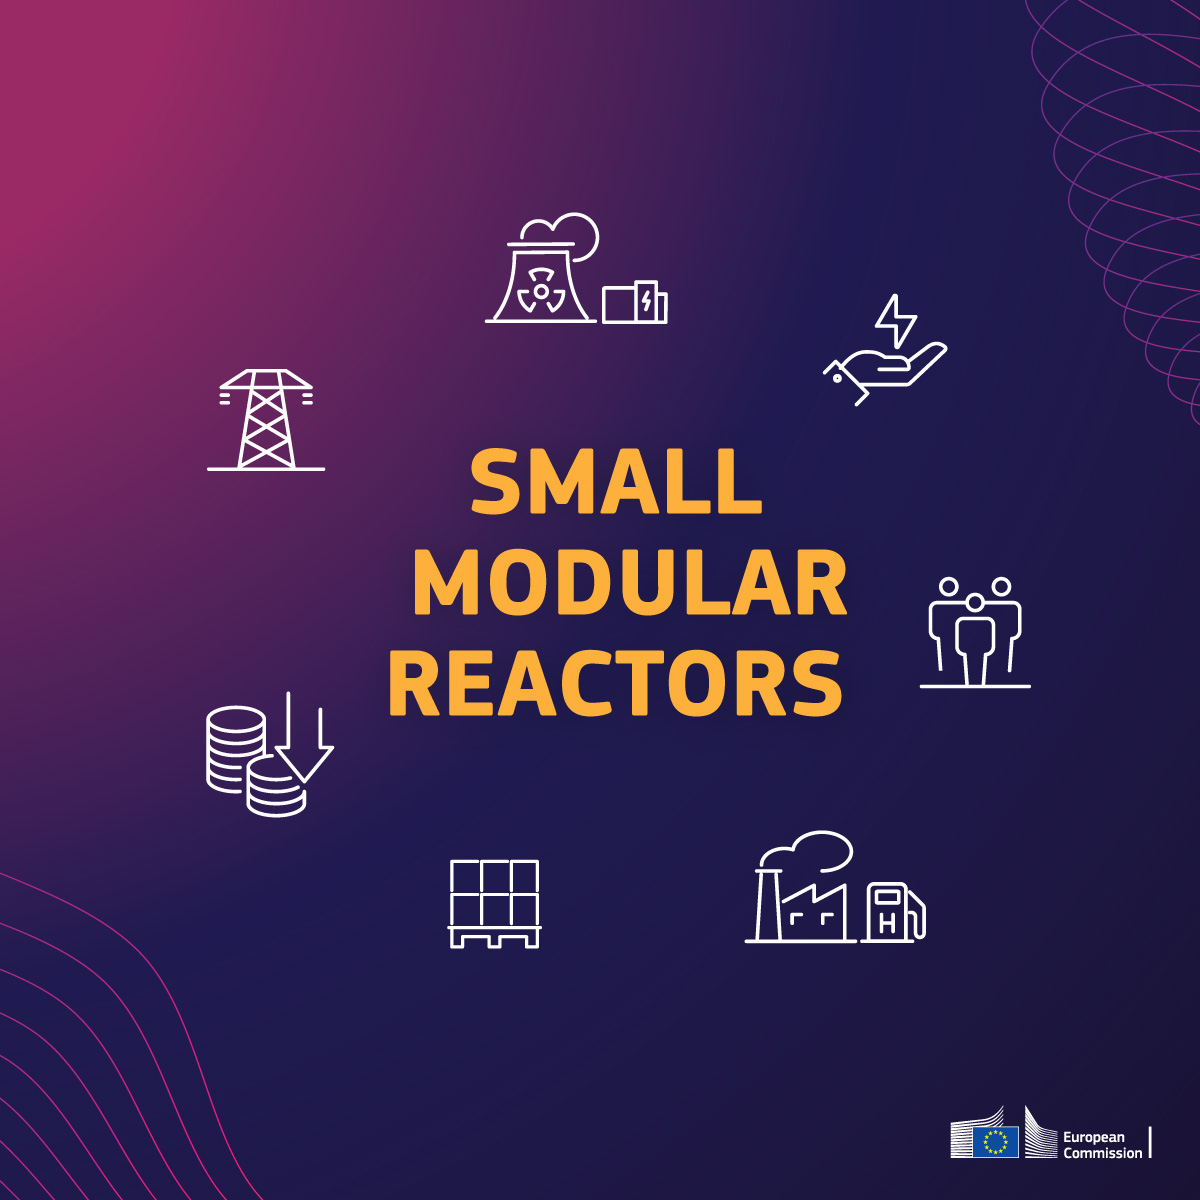 The EC 🇪🇺 recognises the potential contribution of Small Modular Reactors to achieving the energy ⚡️ and climate 🌱 objectives of the #EUGreenDeal. #SMRs are different from traditional #nuclear power plants - discover their advantages and more 👇 🔗 europa.eu/!gwT47g